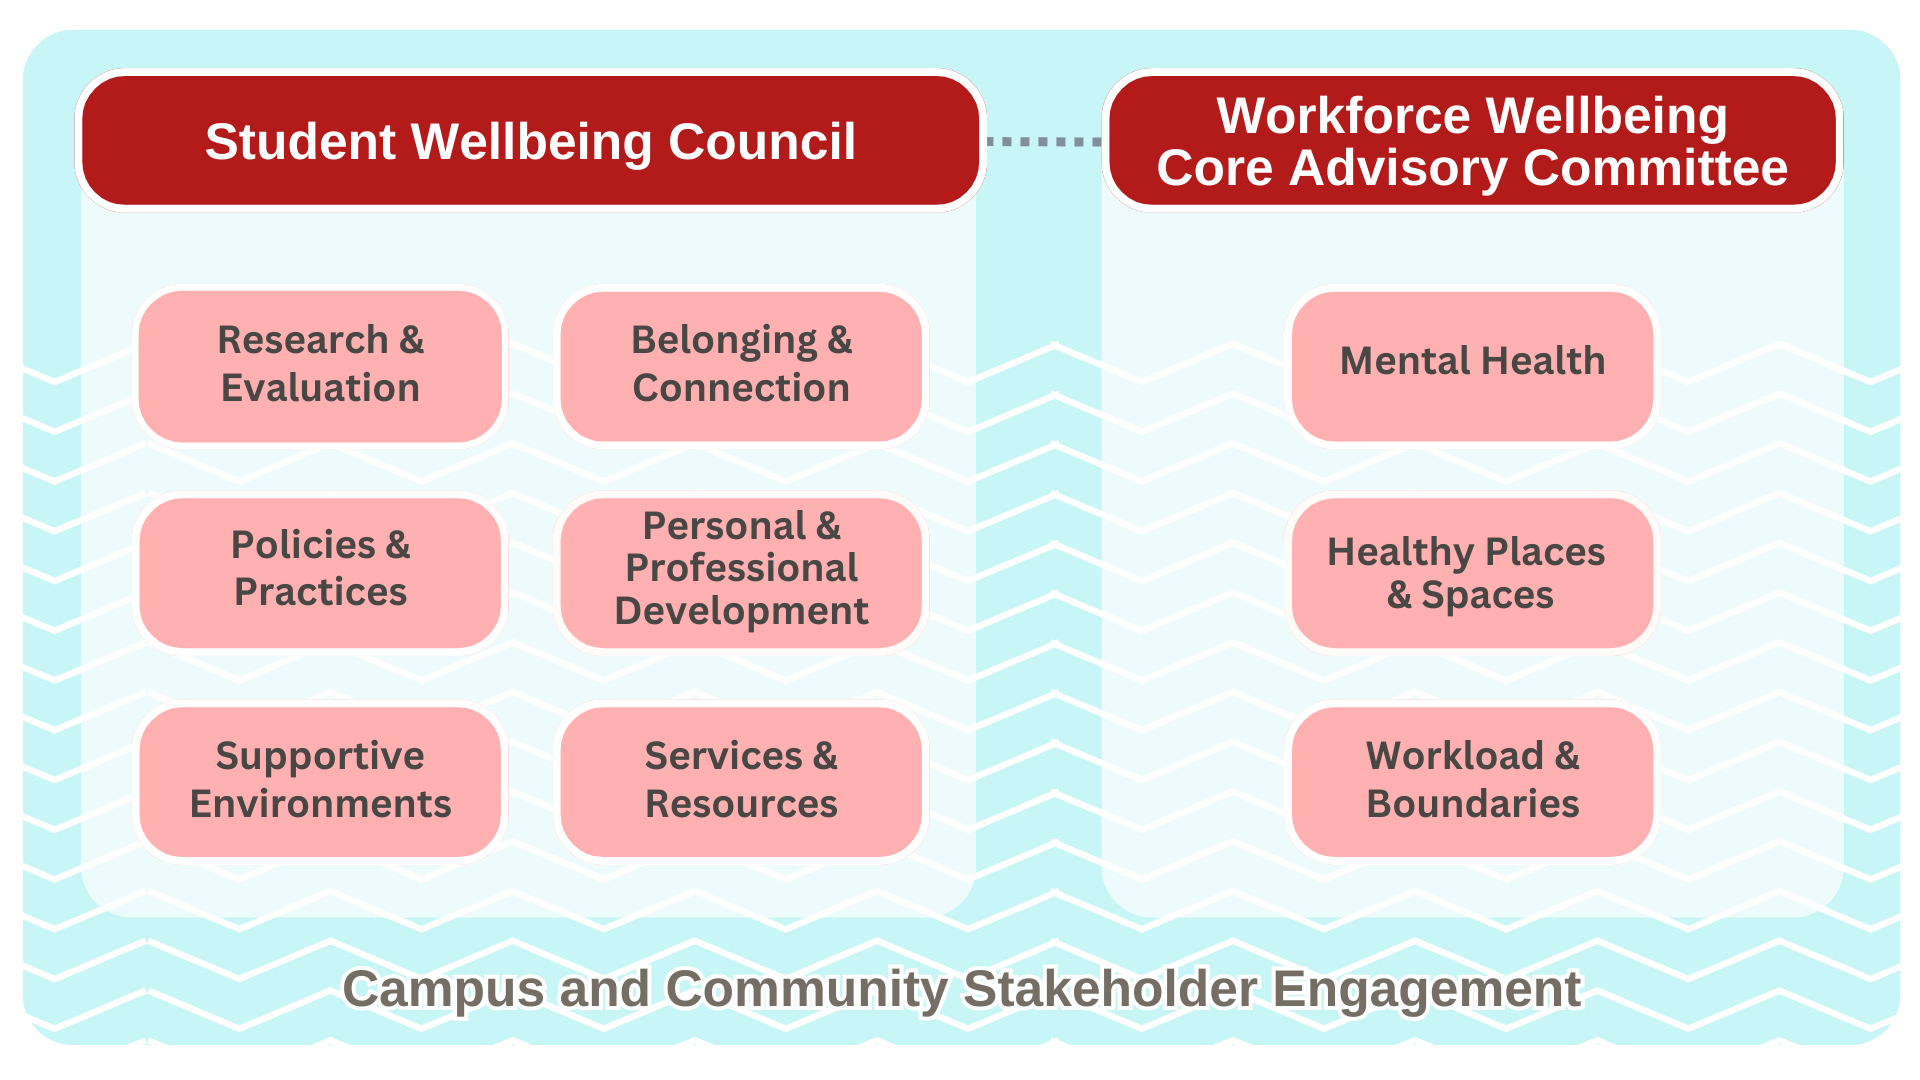 A diagram showing relationship between Student Wellbeing Council, Workforce Wellbeing Core Advisory Committee, the subcommittees for each, and relationship to campus and community stakeholder engagement.